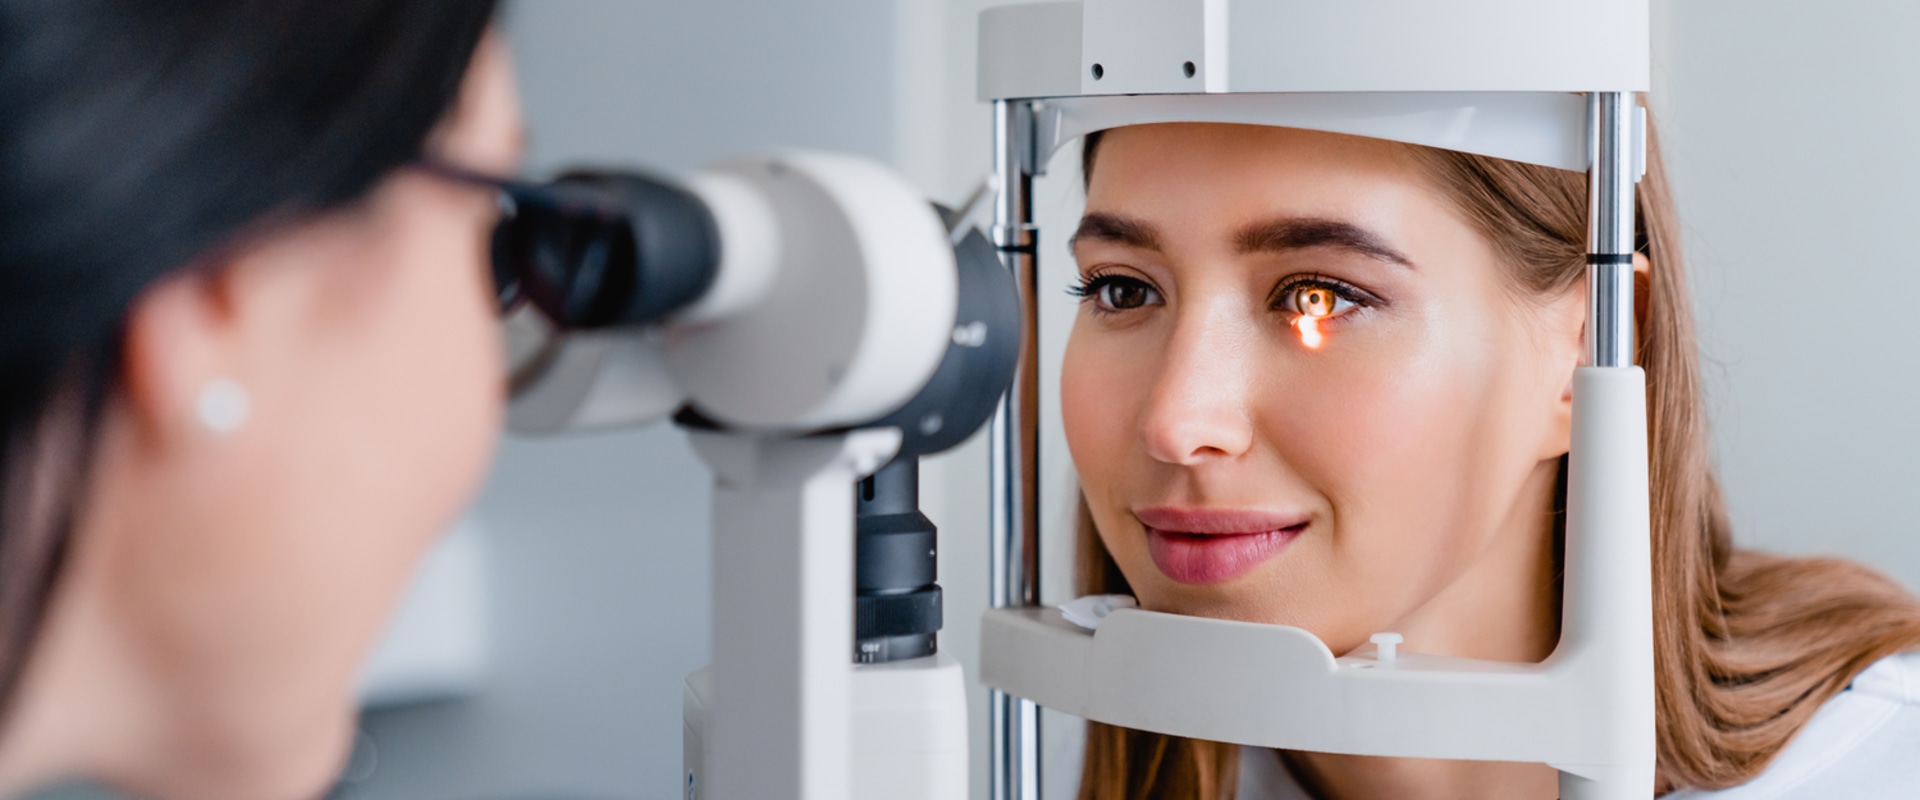 Do i need to prepare for an eye exam?